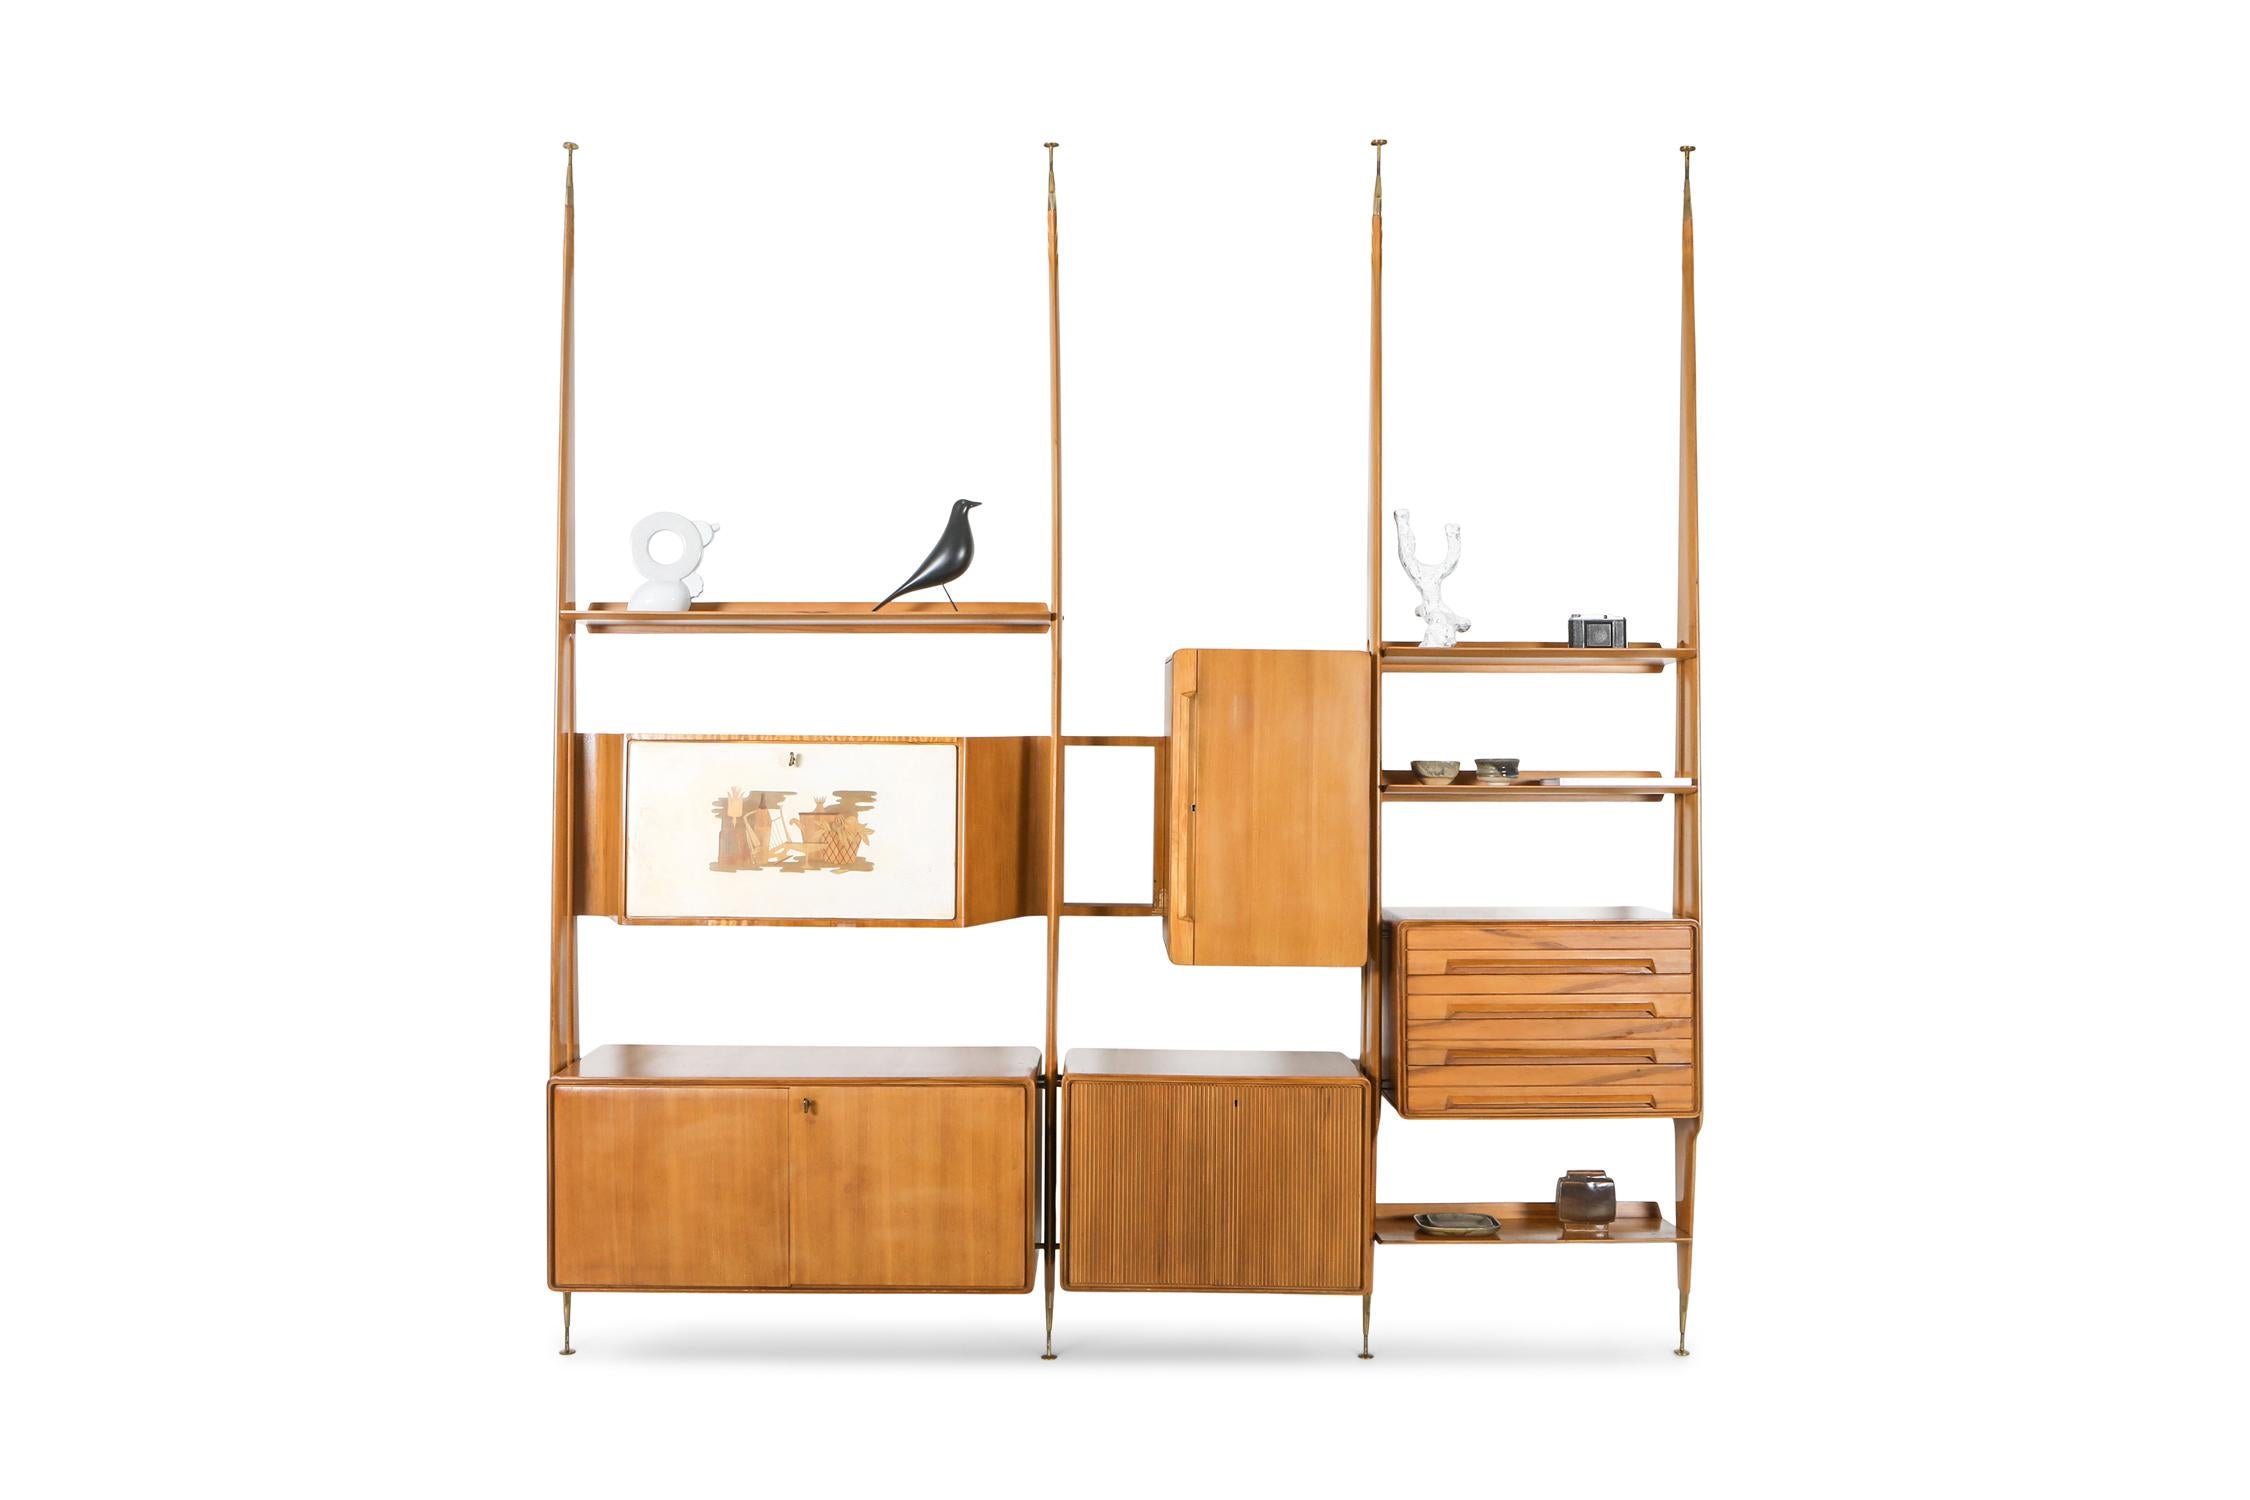 Gio Ponti, wall unit, shelve system, beech, Italy, 1950s

Diverse shelving unit style of Gio Ponti
The composition of this unit comprises 5 storage pieces, 4 large shelves and 4 stands.
As the system is modular one can choose which piece hangs